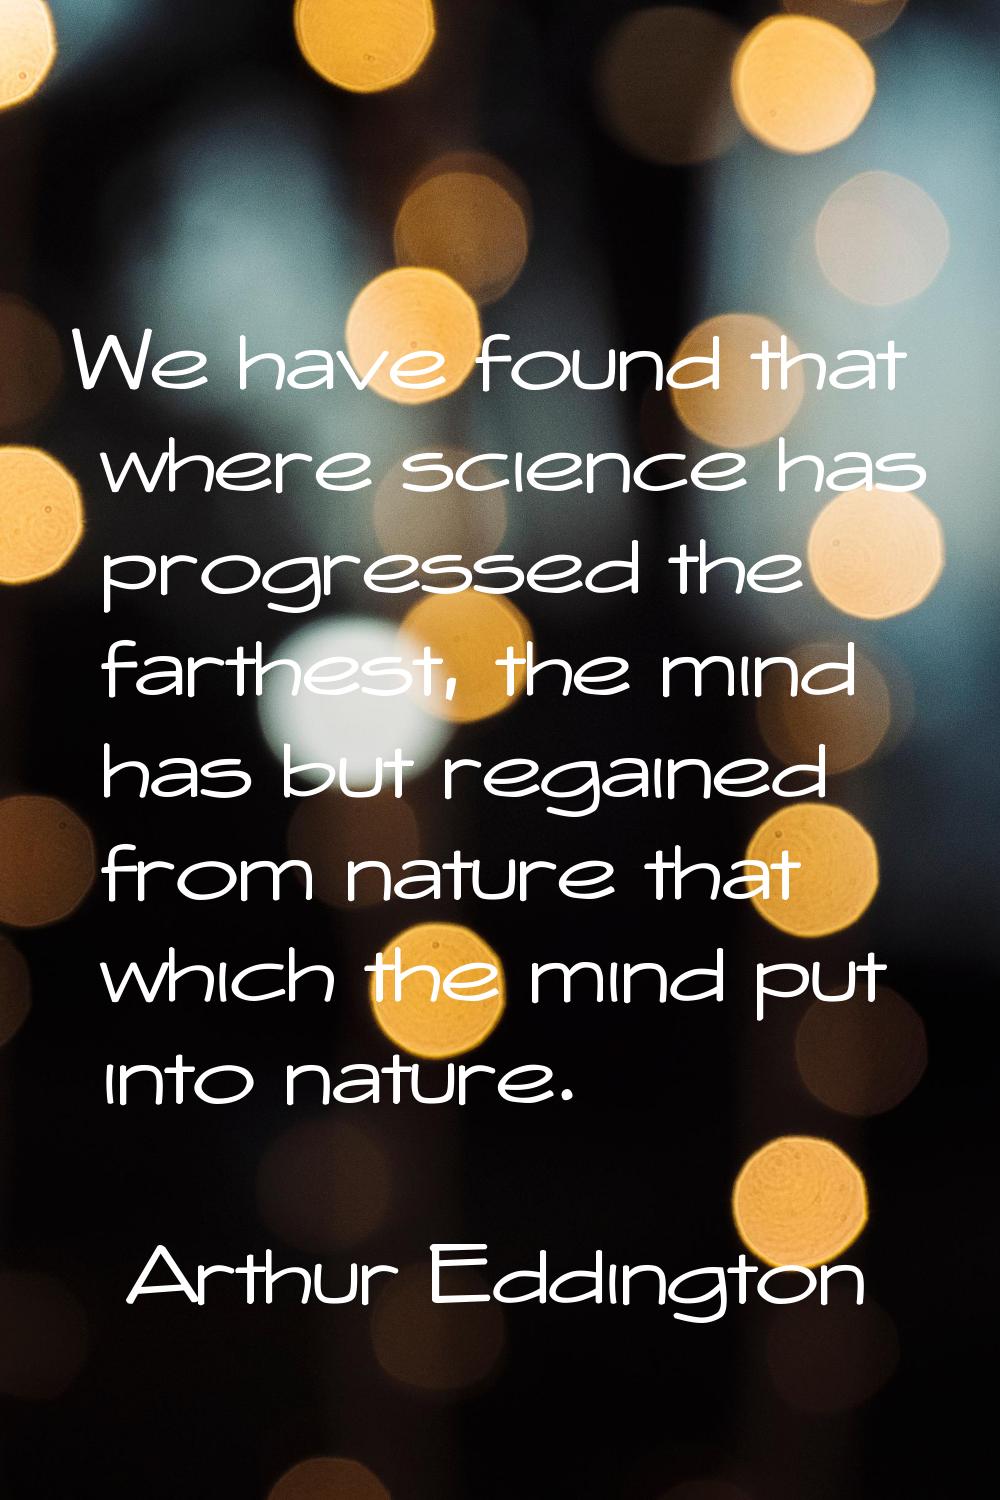 We have found that where science has progressed the farthest, the mind has but regained from nature